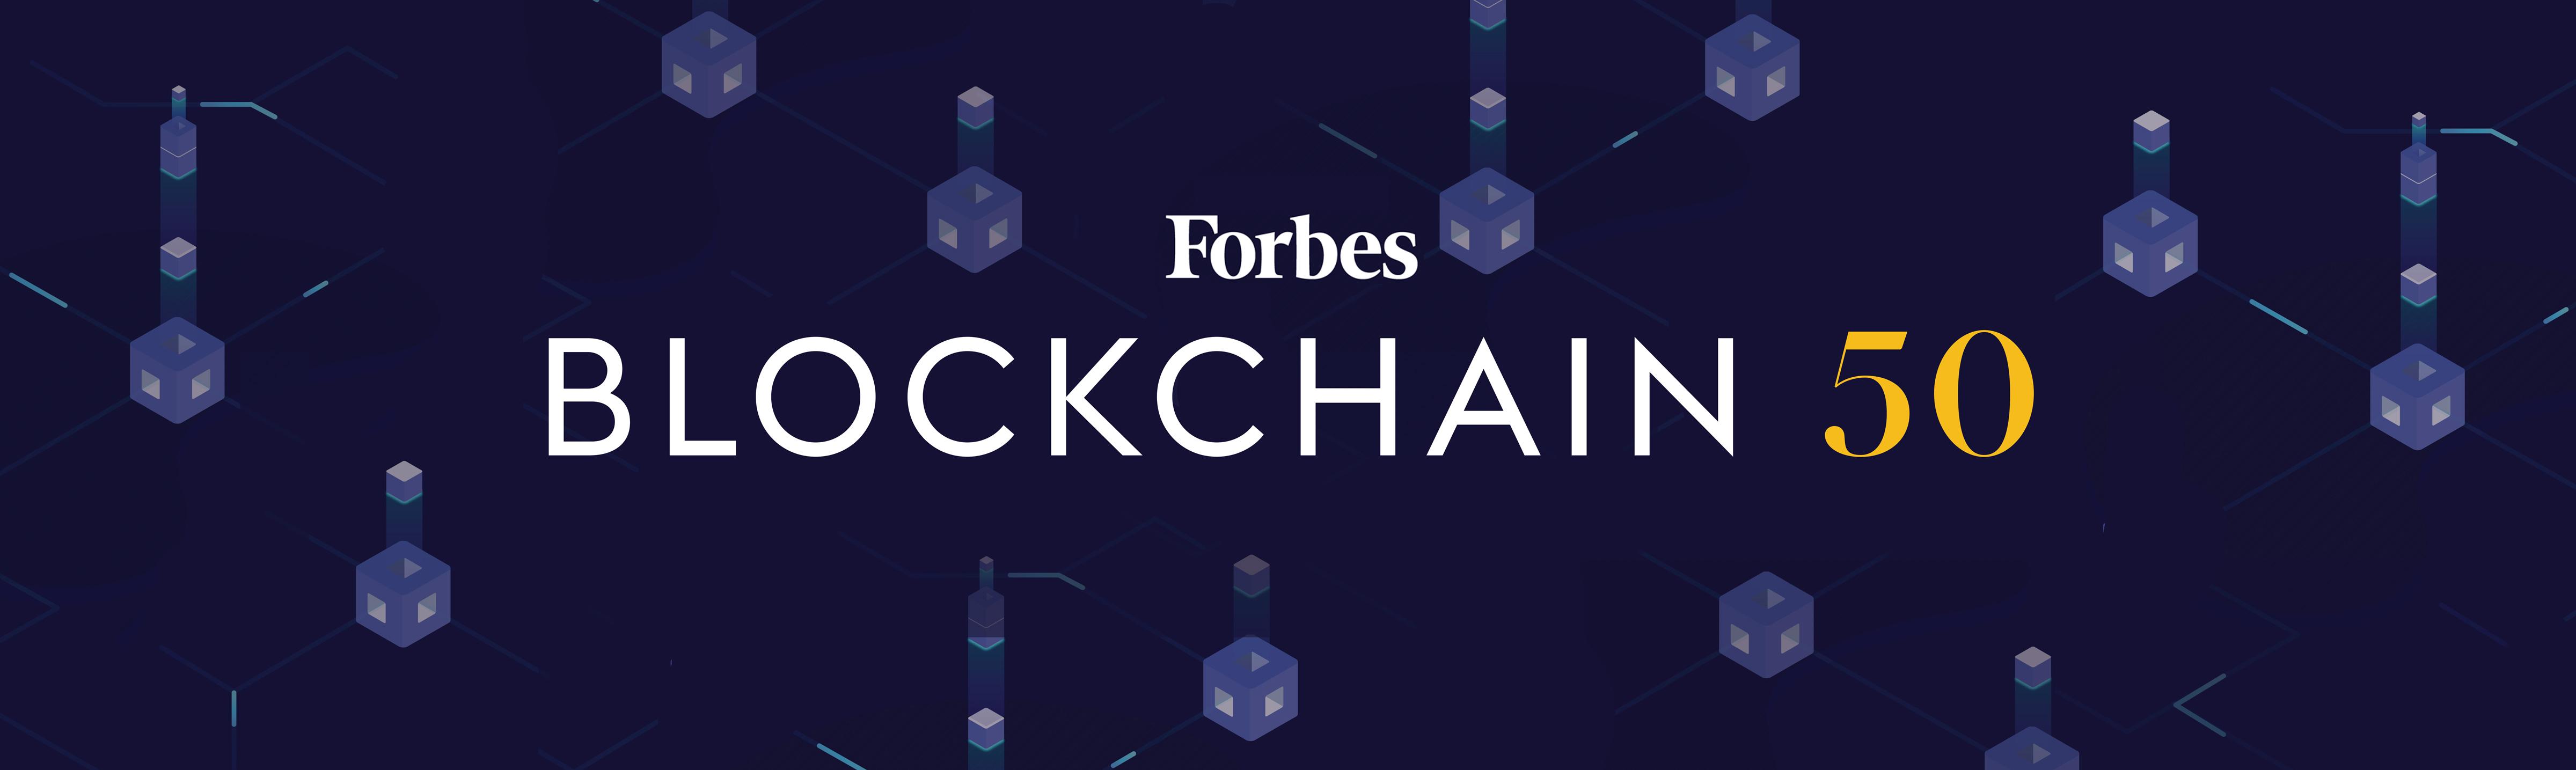 Forbes Blockchain Full List Of Top Companies Leveraging Blockchain - Forbes India